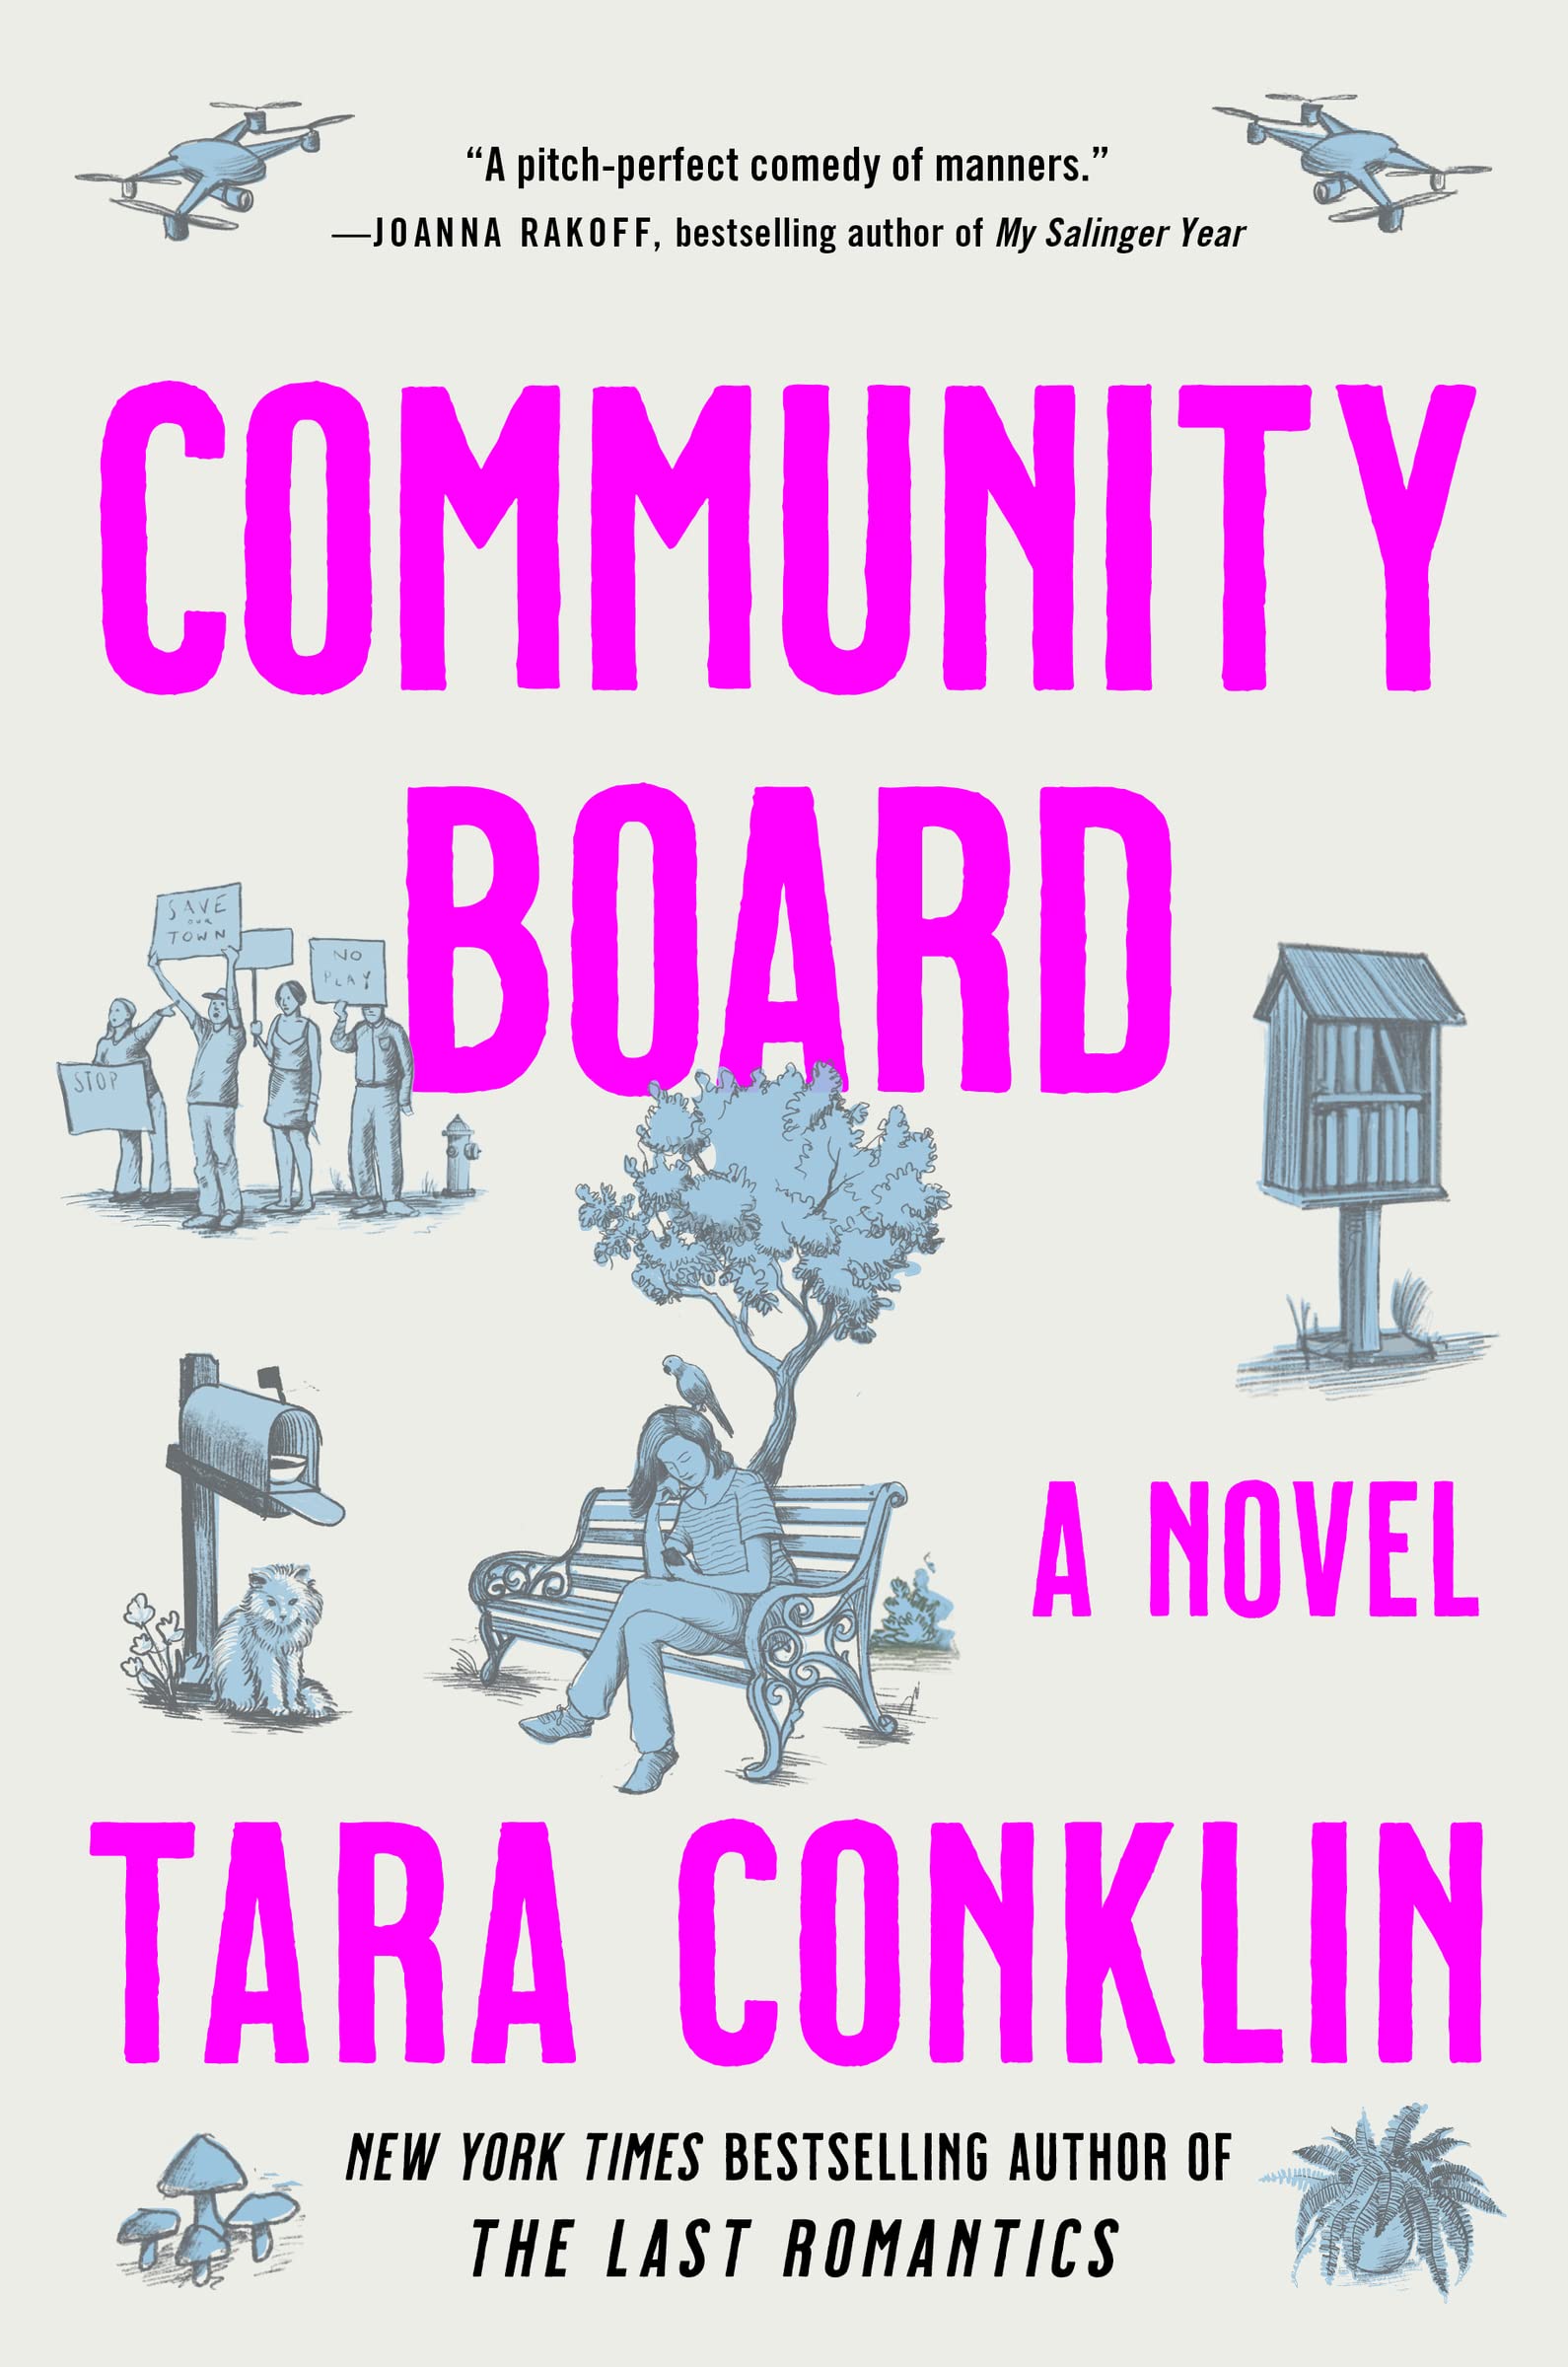 Image for "Community Board"